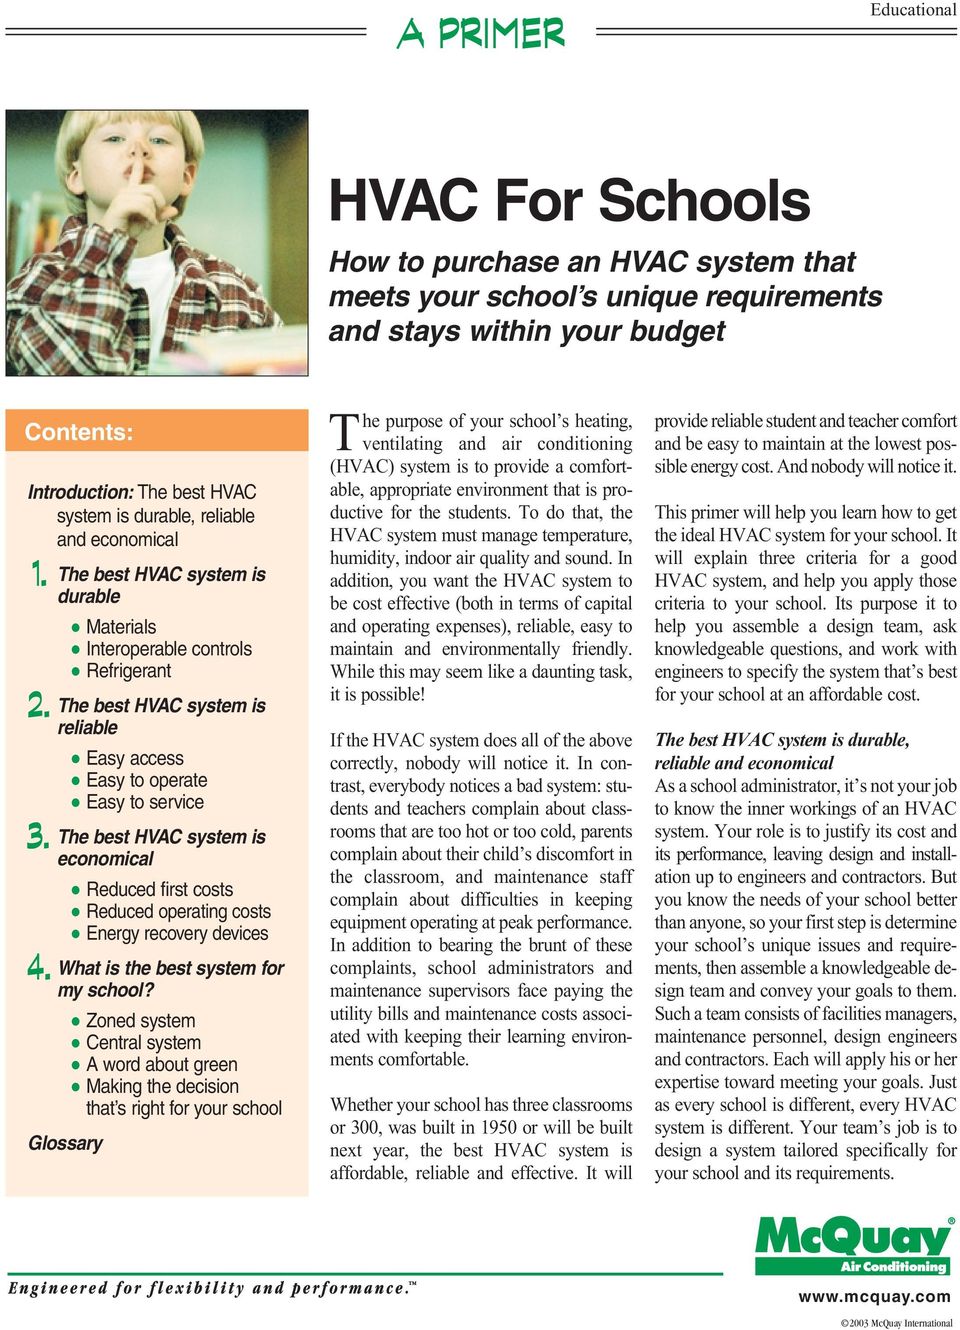 The best HVAC system is economical Reduced first costs Reduced operating costs Energy recovery devices 4. What is the best system for my school?